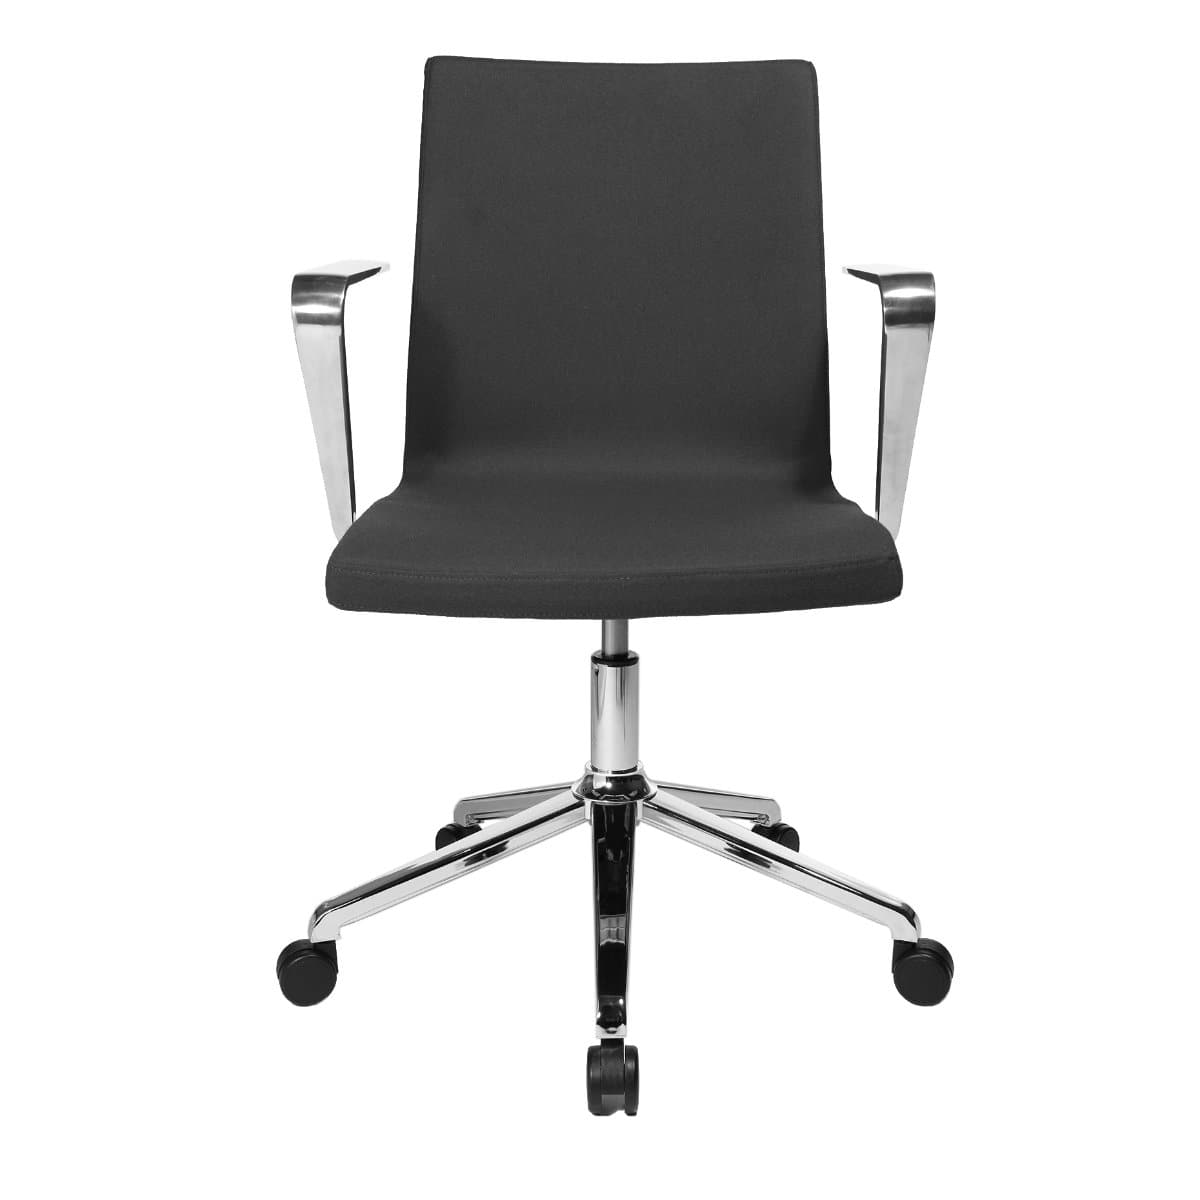 Topstar SITNESS CUBE Swivel Visitor Meeting Chair with armrests, Fabric Anthrazite